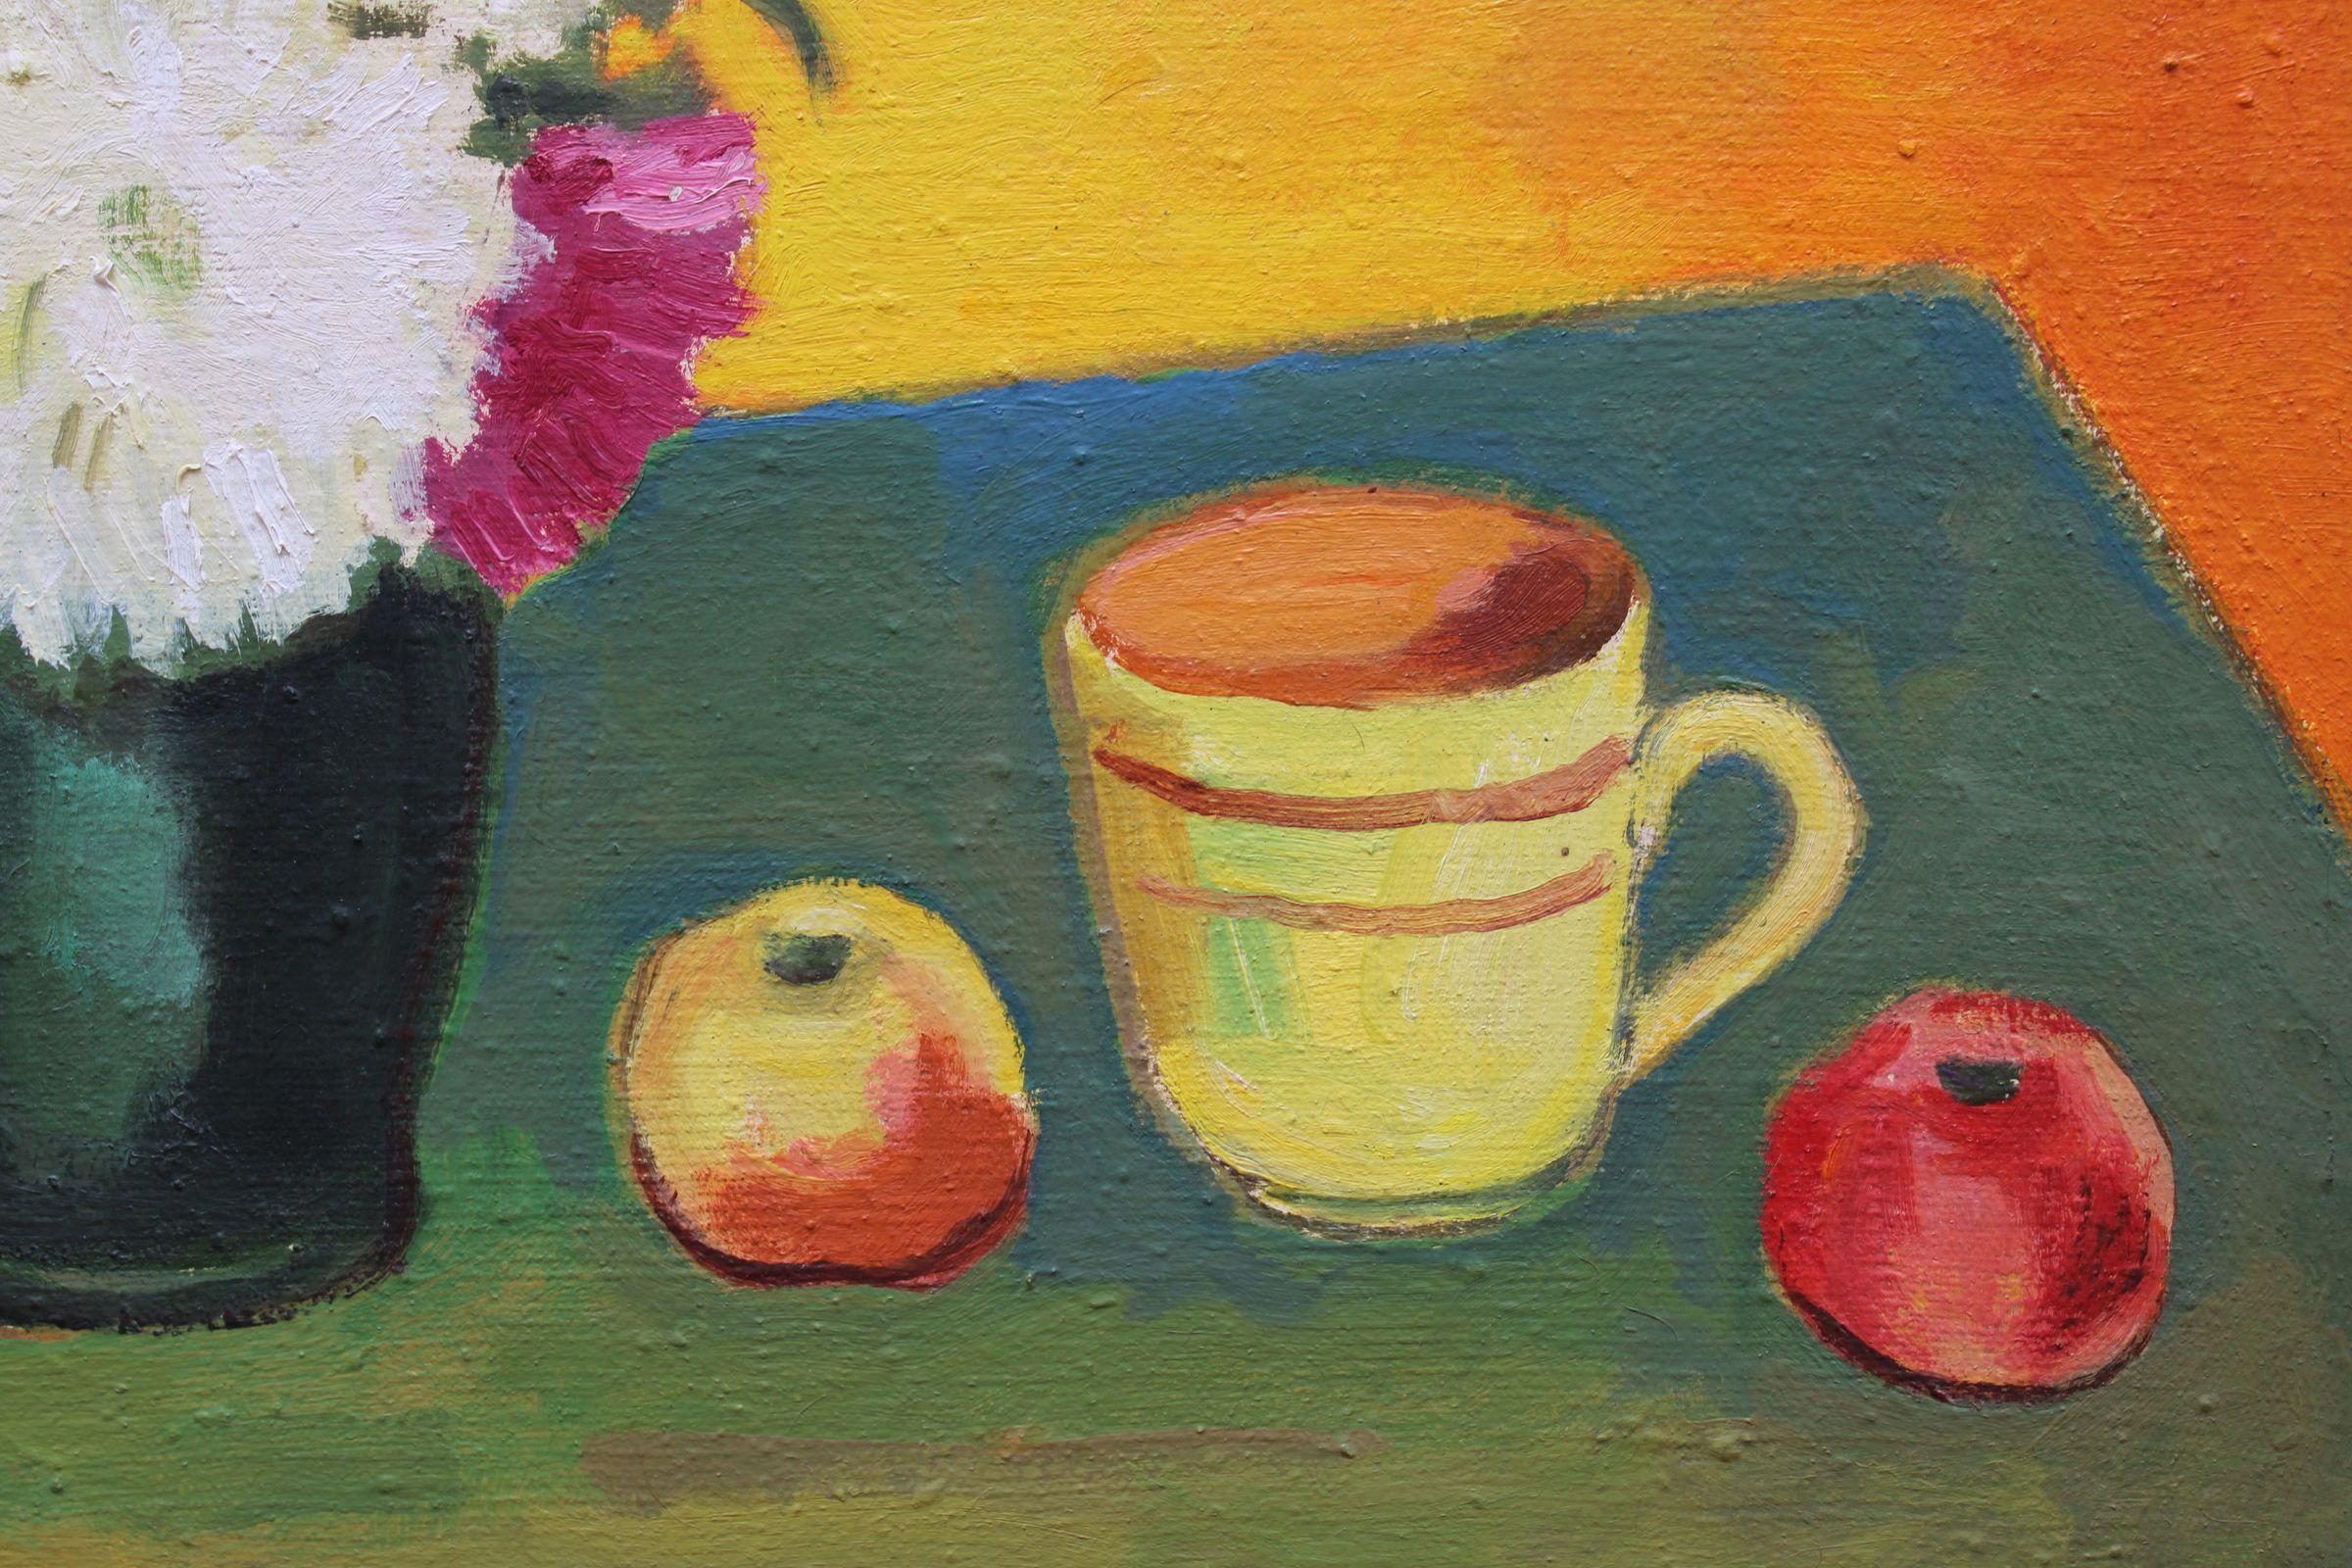 Still life with apples. 1989. Oil on canvas, 60x73 cm

